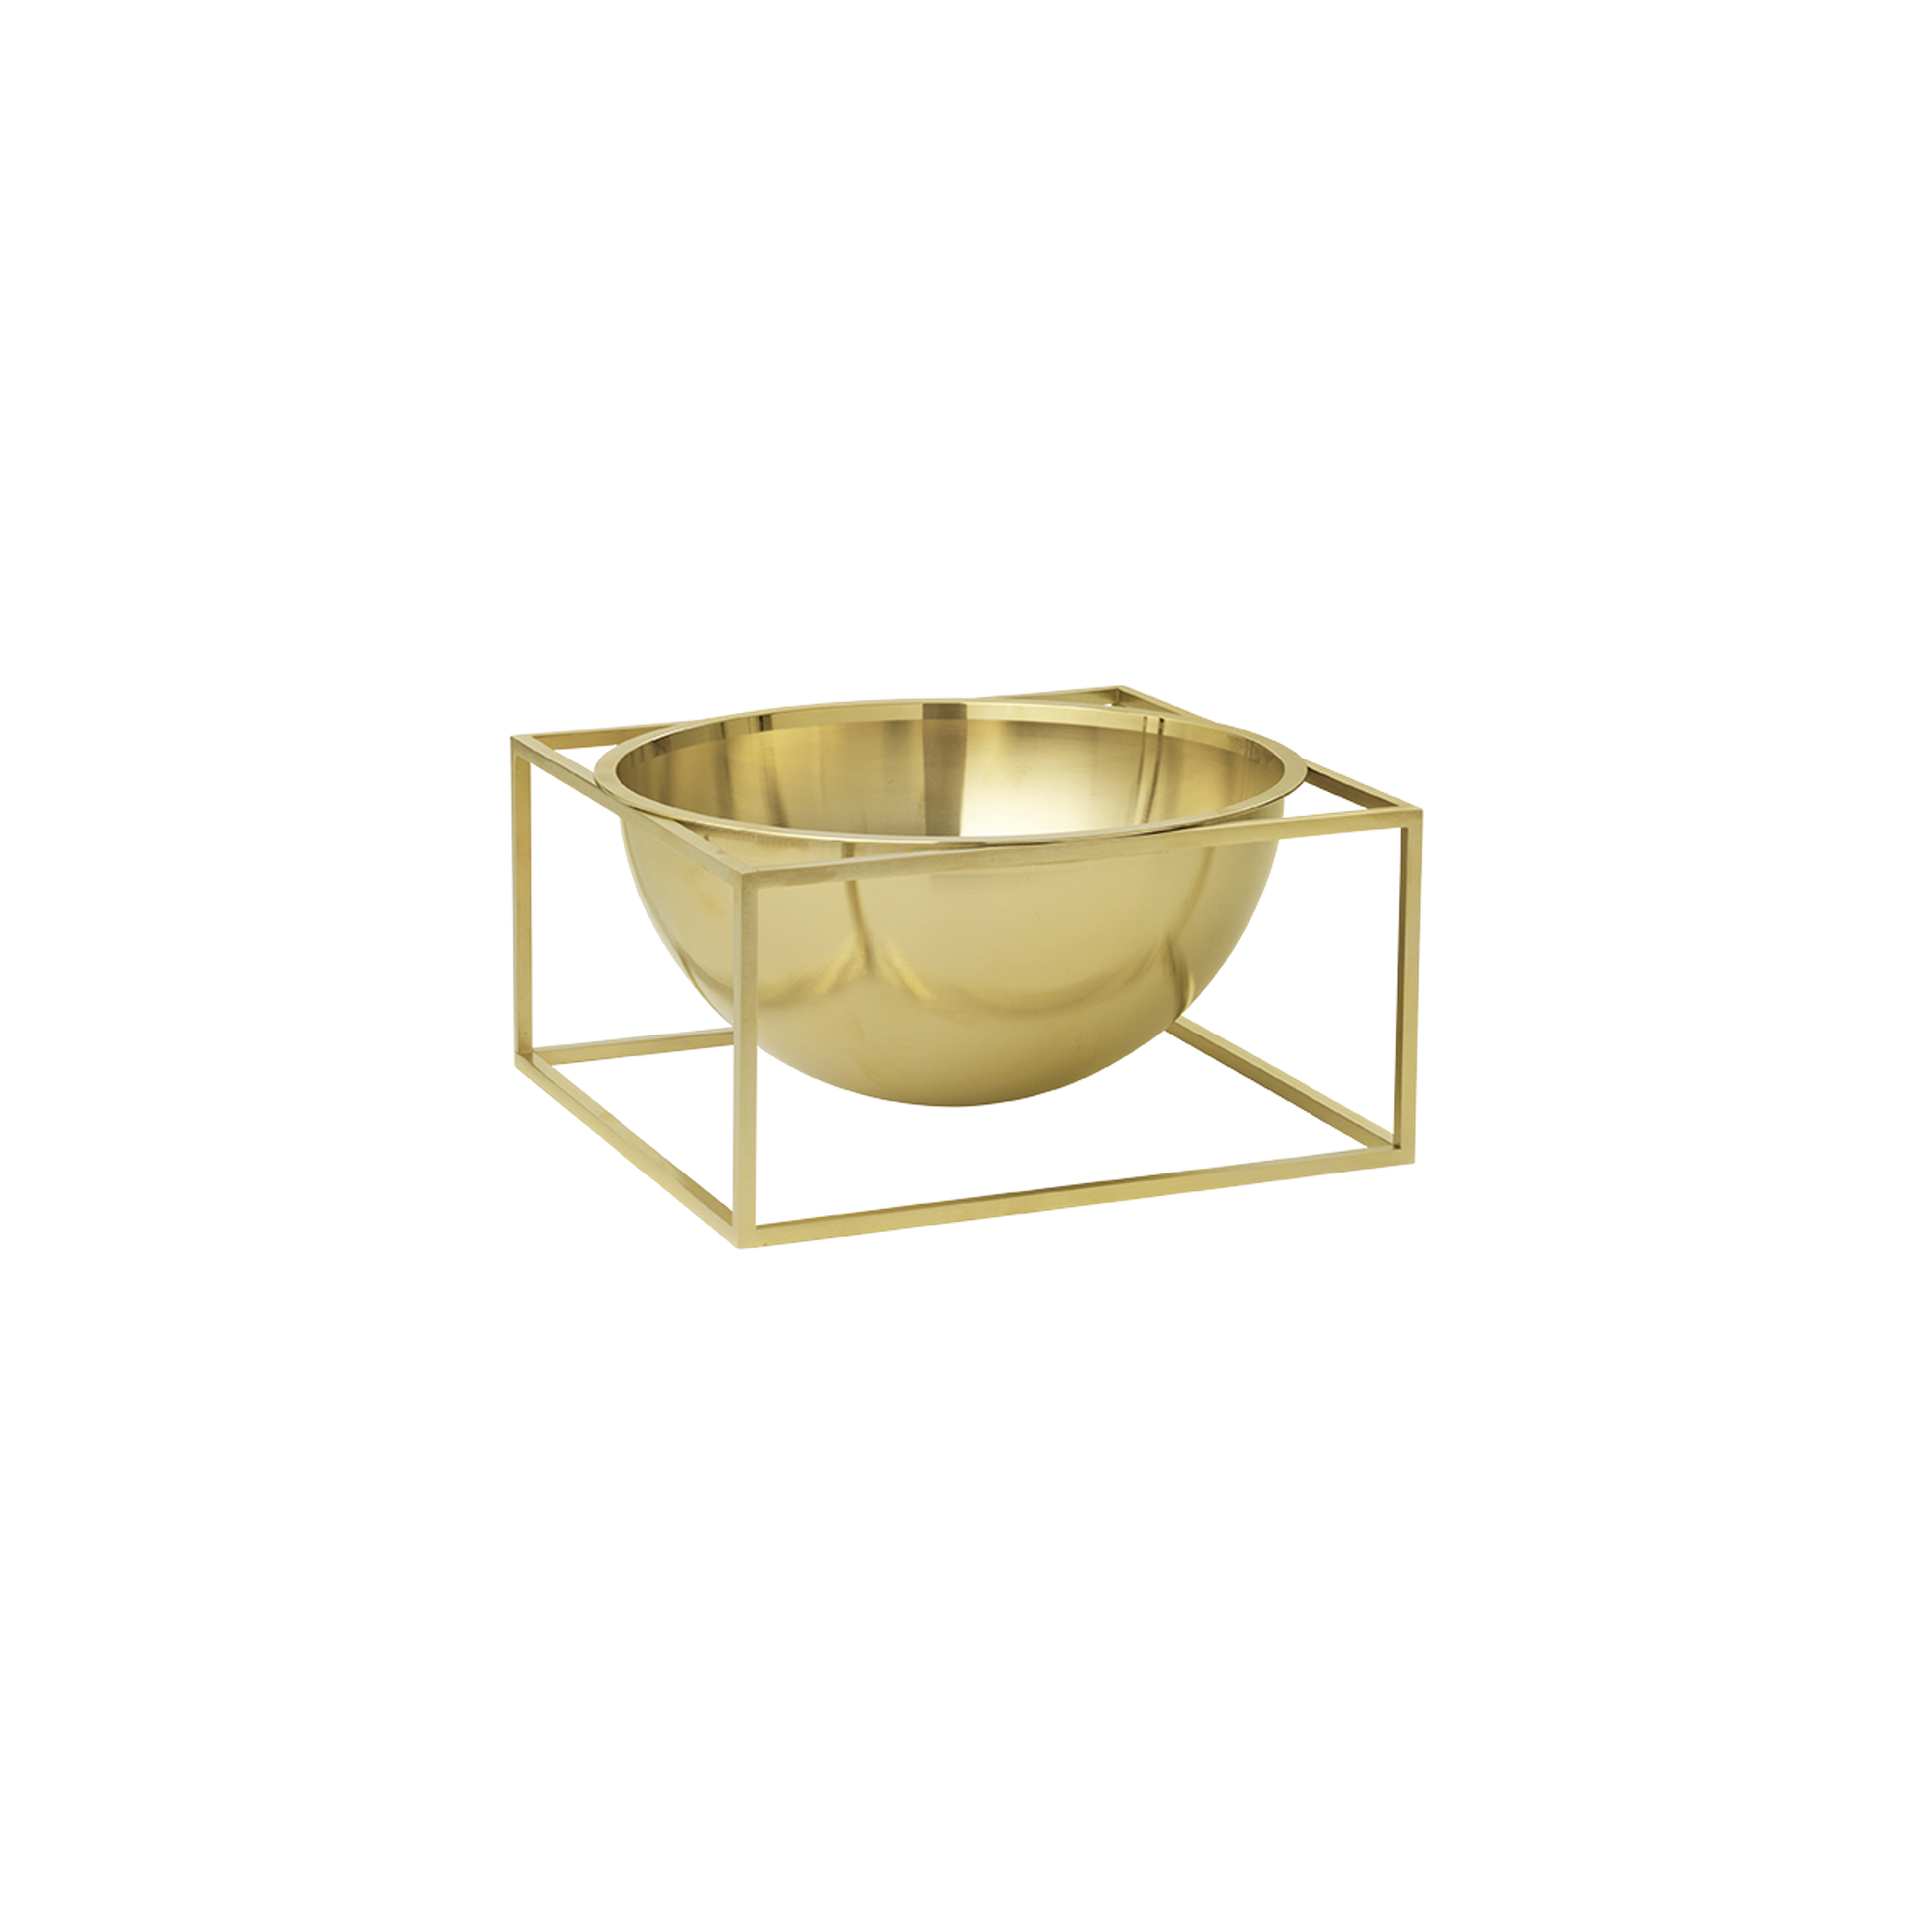 Bowl Centerpiece Large by Audo #Gold Plated